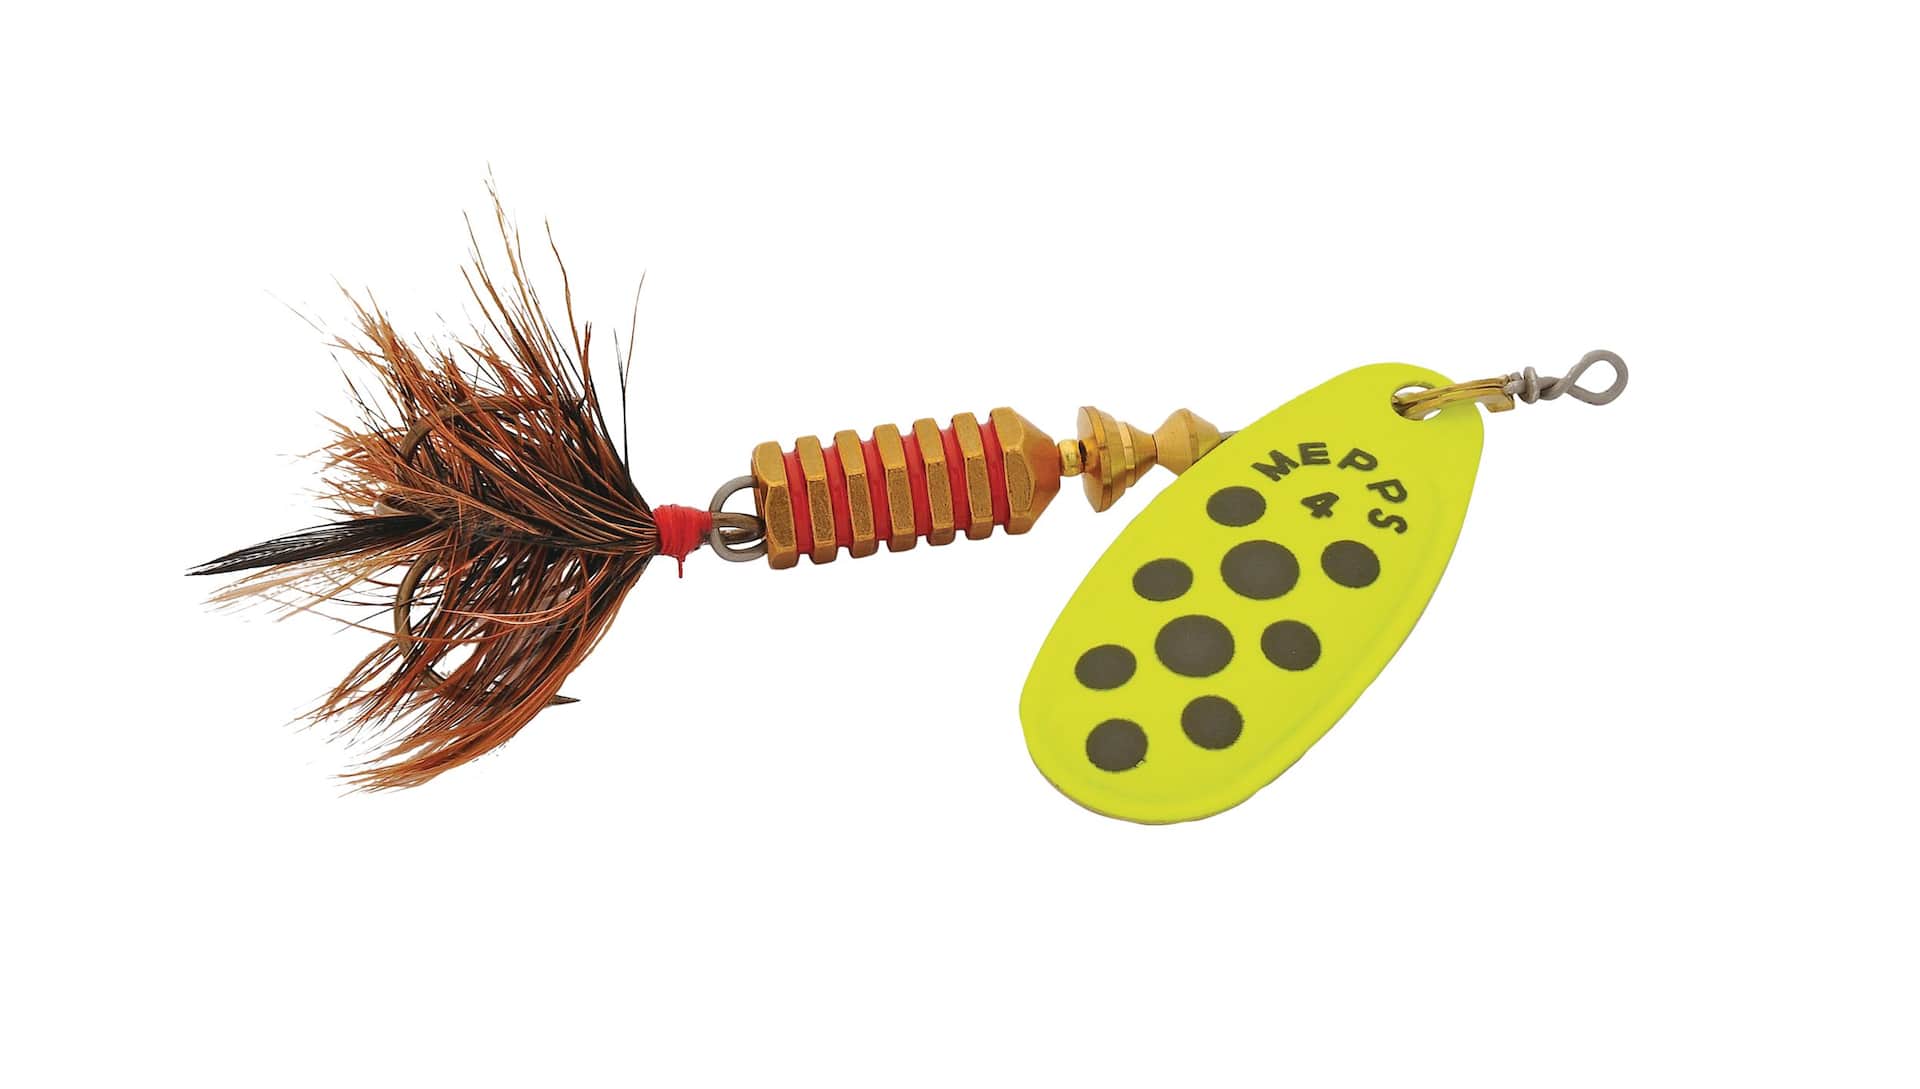 https://media-www.canadiantire.ca/product/playing/fishing/fishing-lures/0781788/mepps-comet-minnow-dressed-spinner-c4d-copper-chartreuse-b3a88a4f-70c0-4309-974c-51d24231b8f6-jpgrendition.jpg